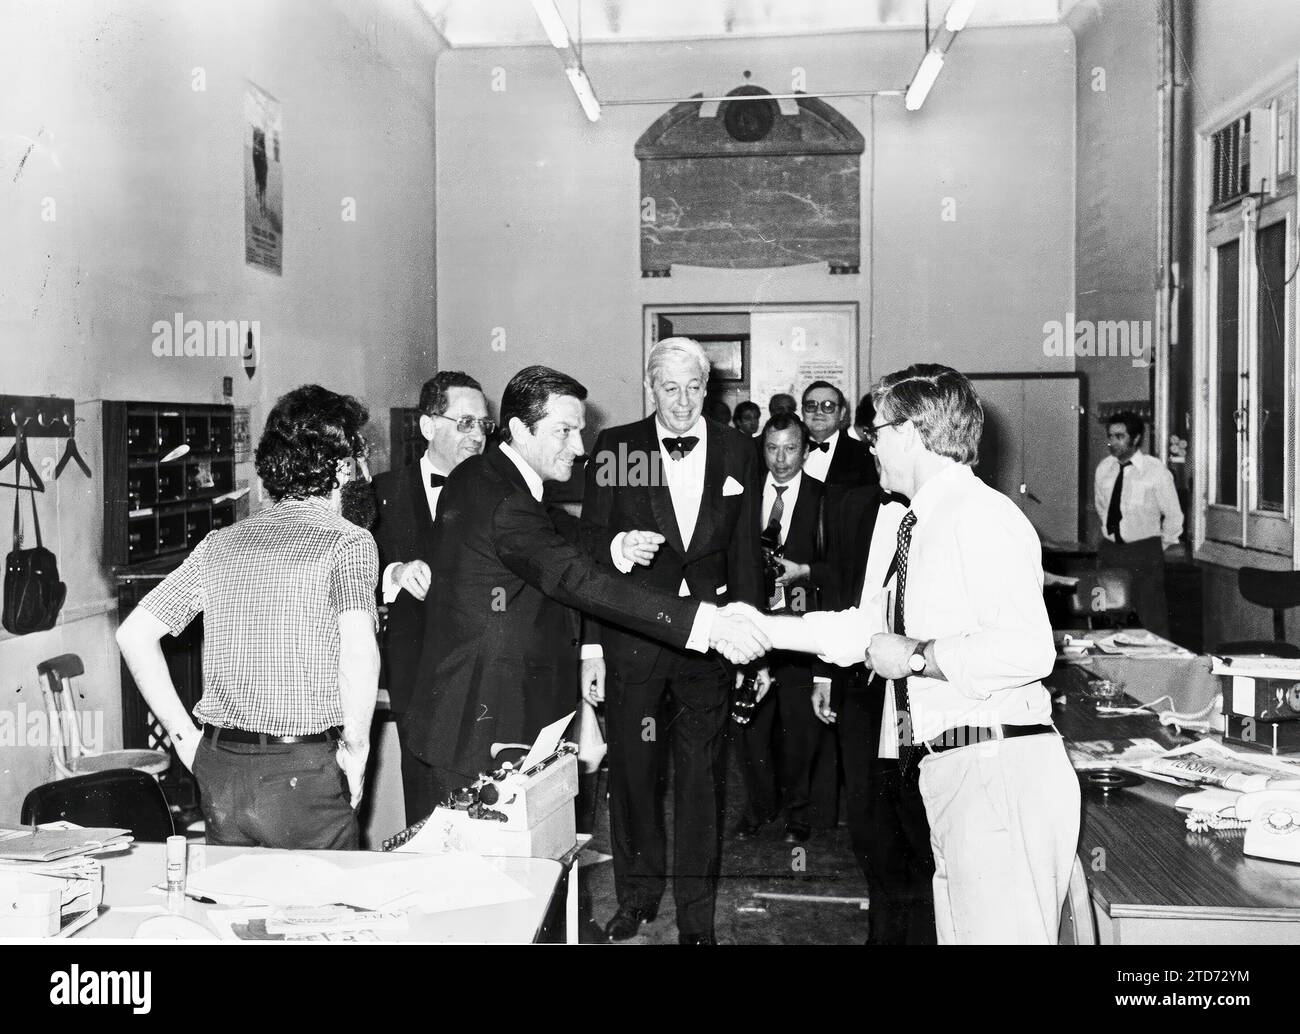 Madrid, 6/18/1980.- Adolfo Suárez in the ABC newsroom, accompanied by Guillermo Luca de Tena. He had attended the Cavia Awards dinner. In the photo he greets the night editor in chief, Ignacio Ramos. Credit: Album / Archivo ABC / Luis Alonso,José García Stock Photo